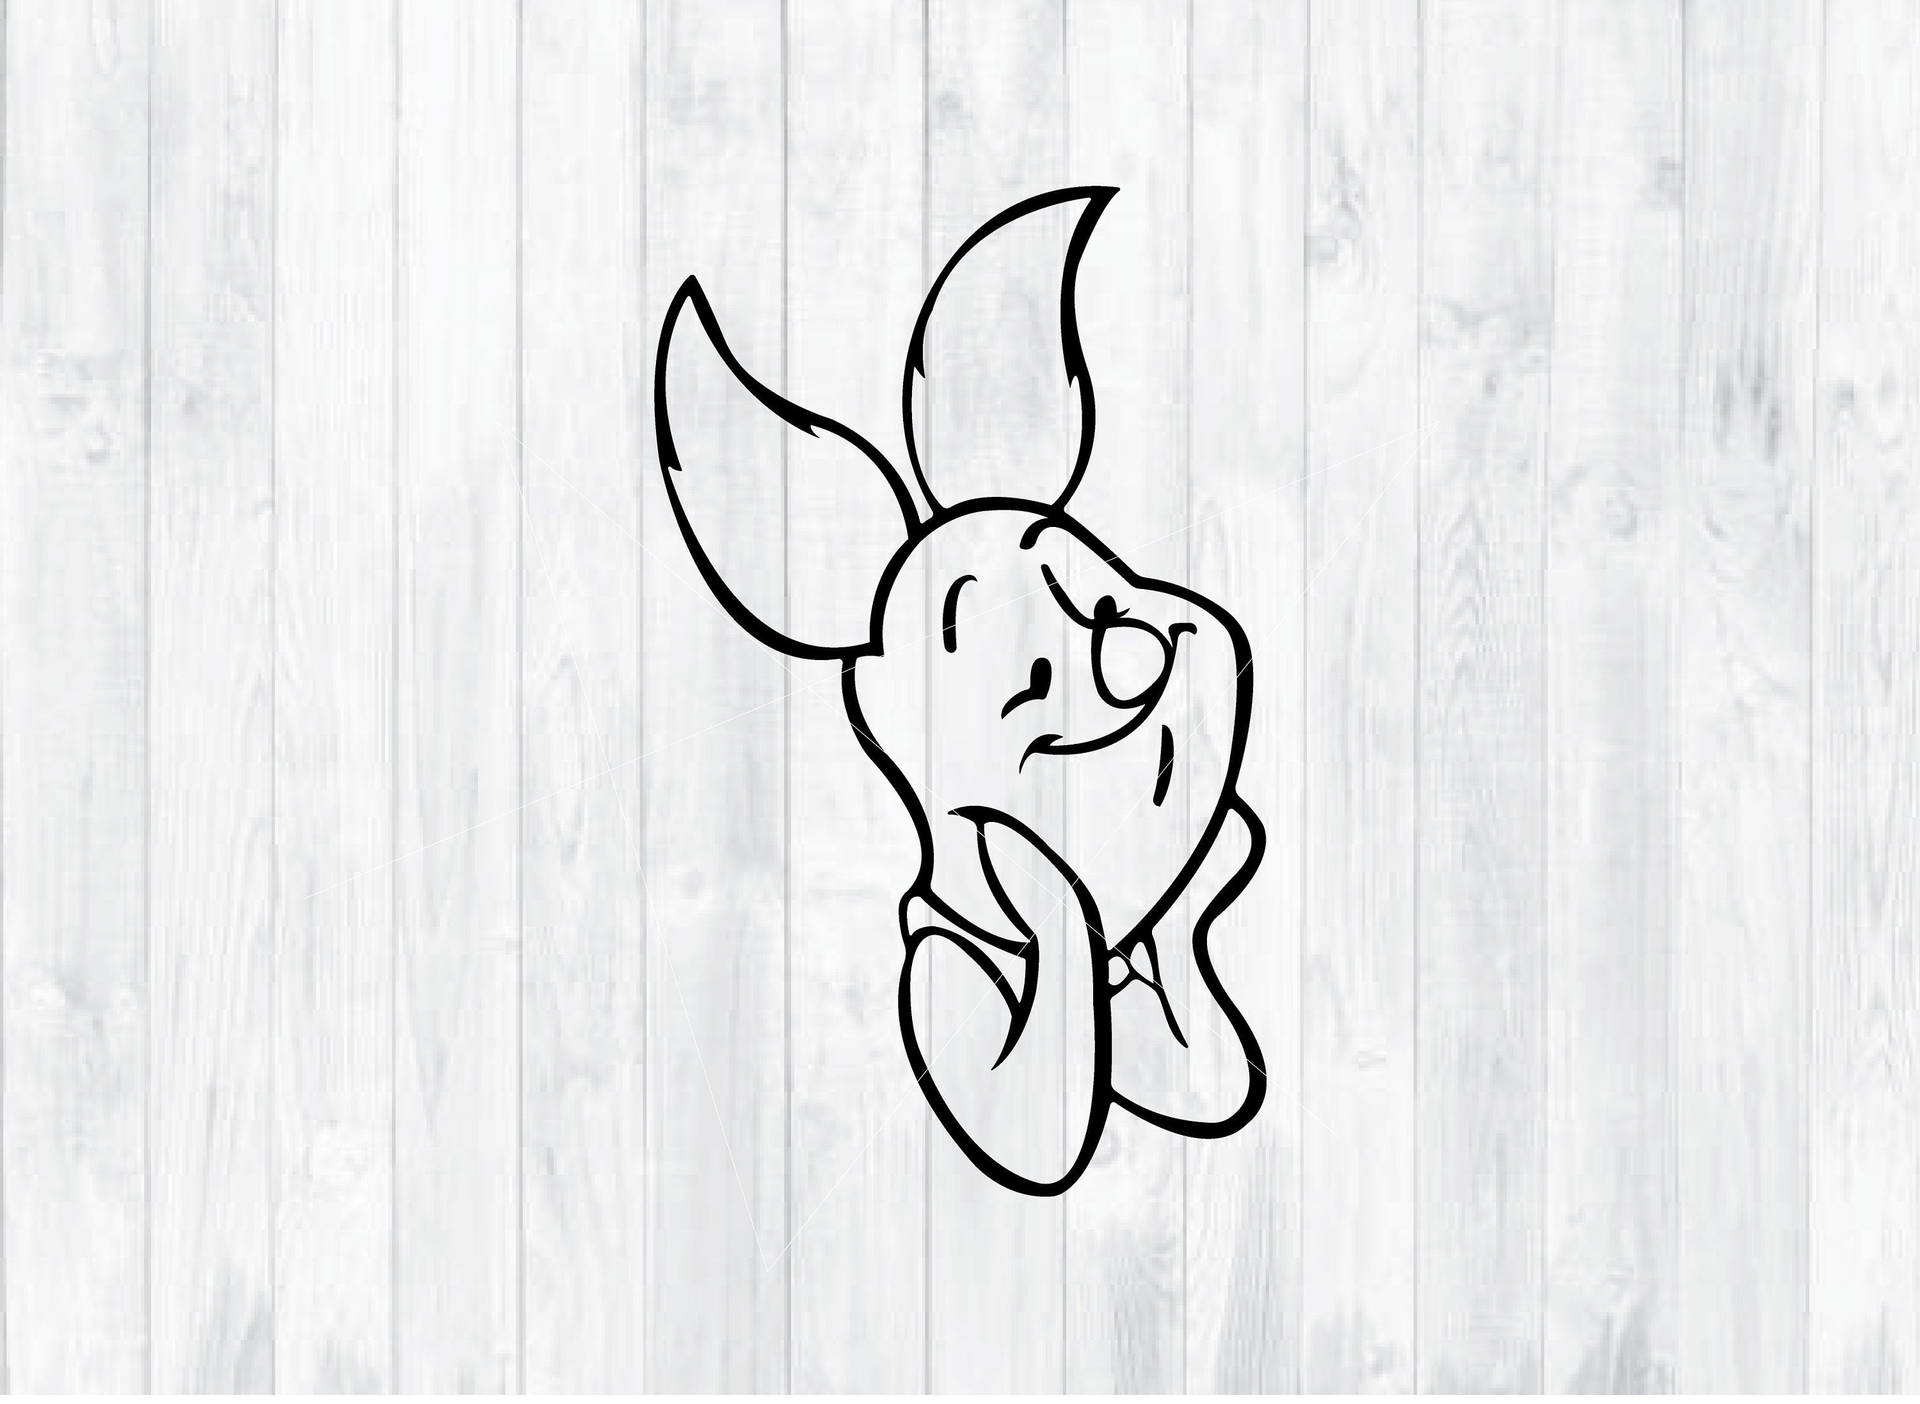 Adorable Sketch of a Lovely Piglet Wallpaper